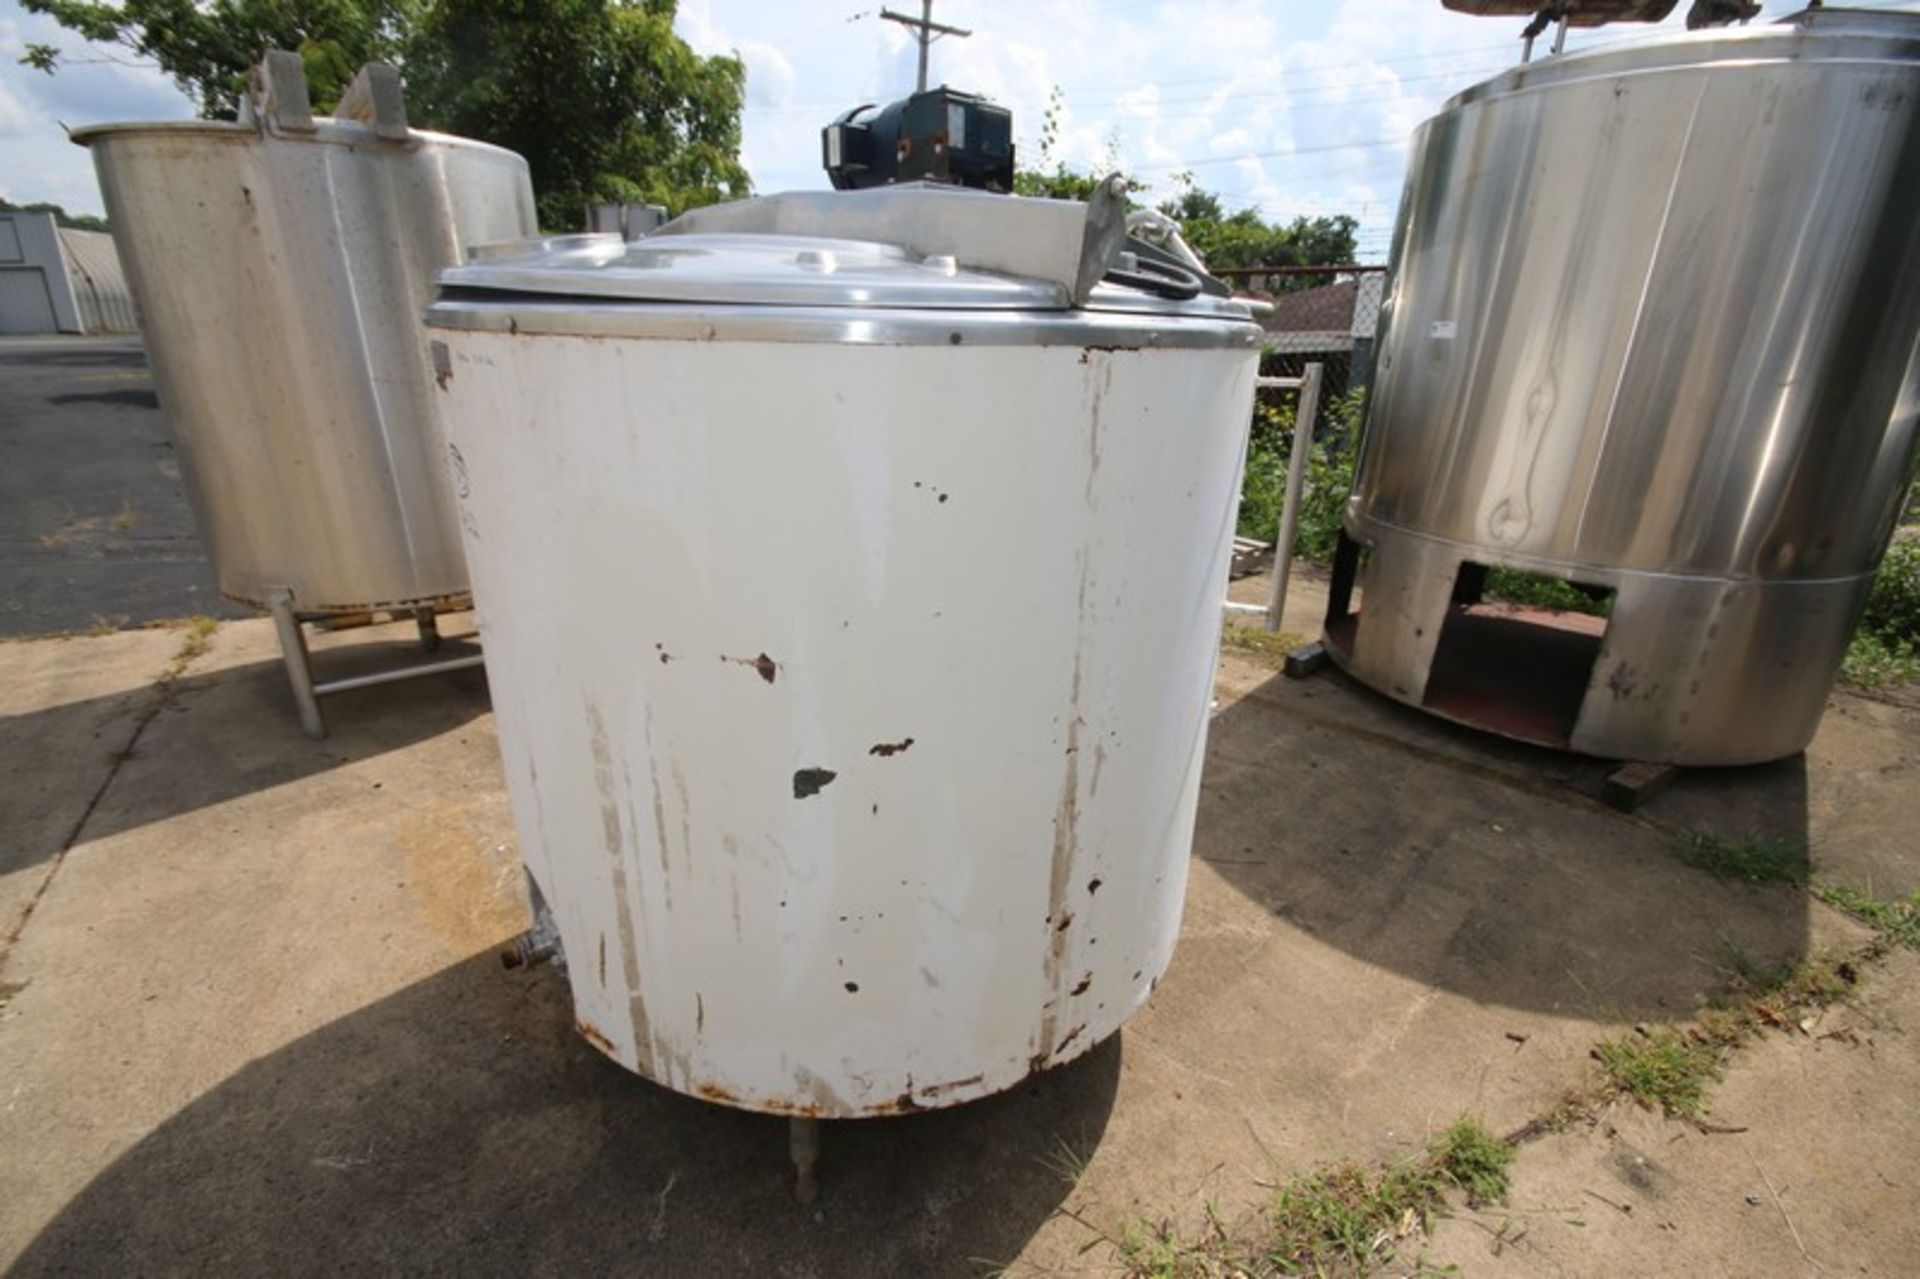 Steriline Aprox. 300 Gallon Hinged Lid, Jacketed S/S Tank, Model 53016-2, SN 194, Painted Exterior, - Image 6 of 7